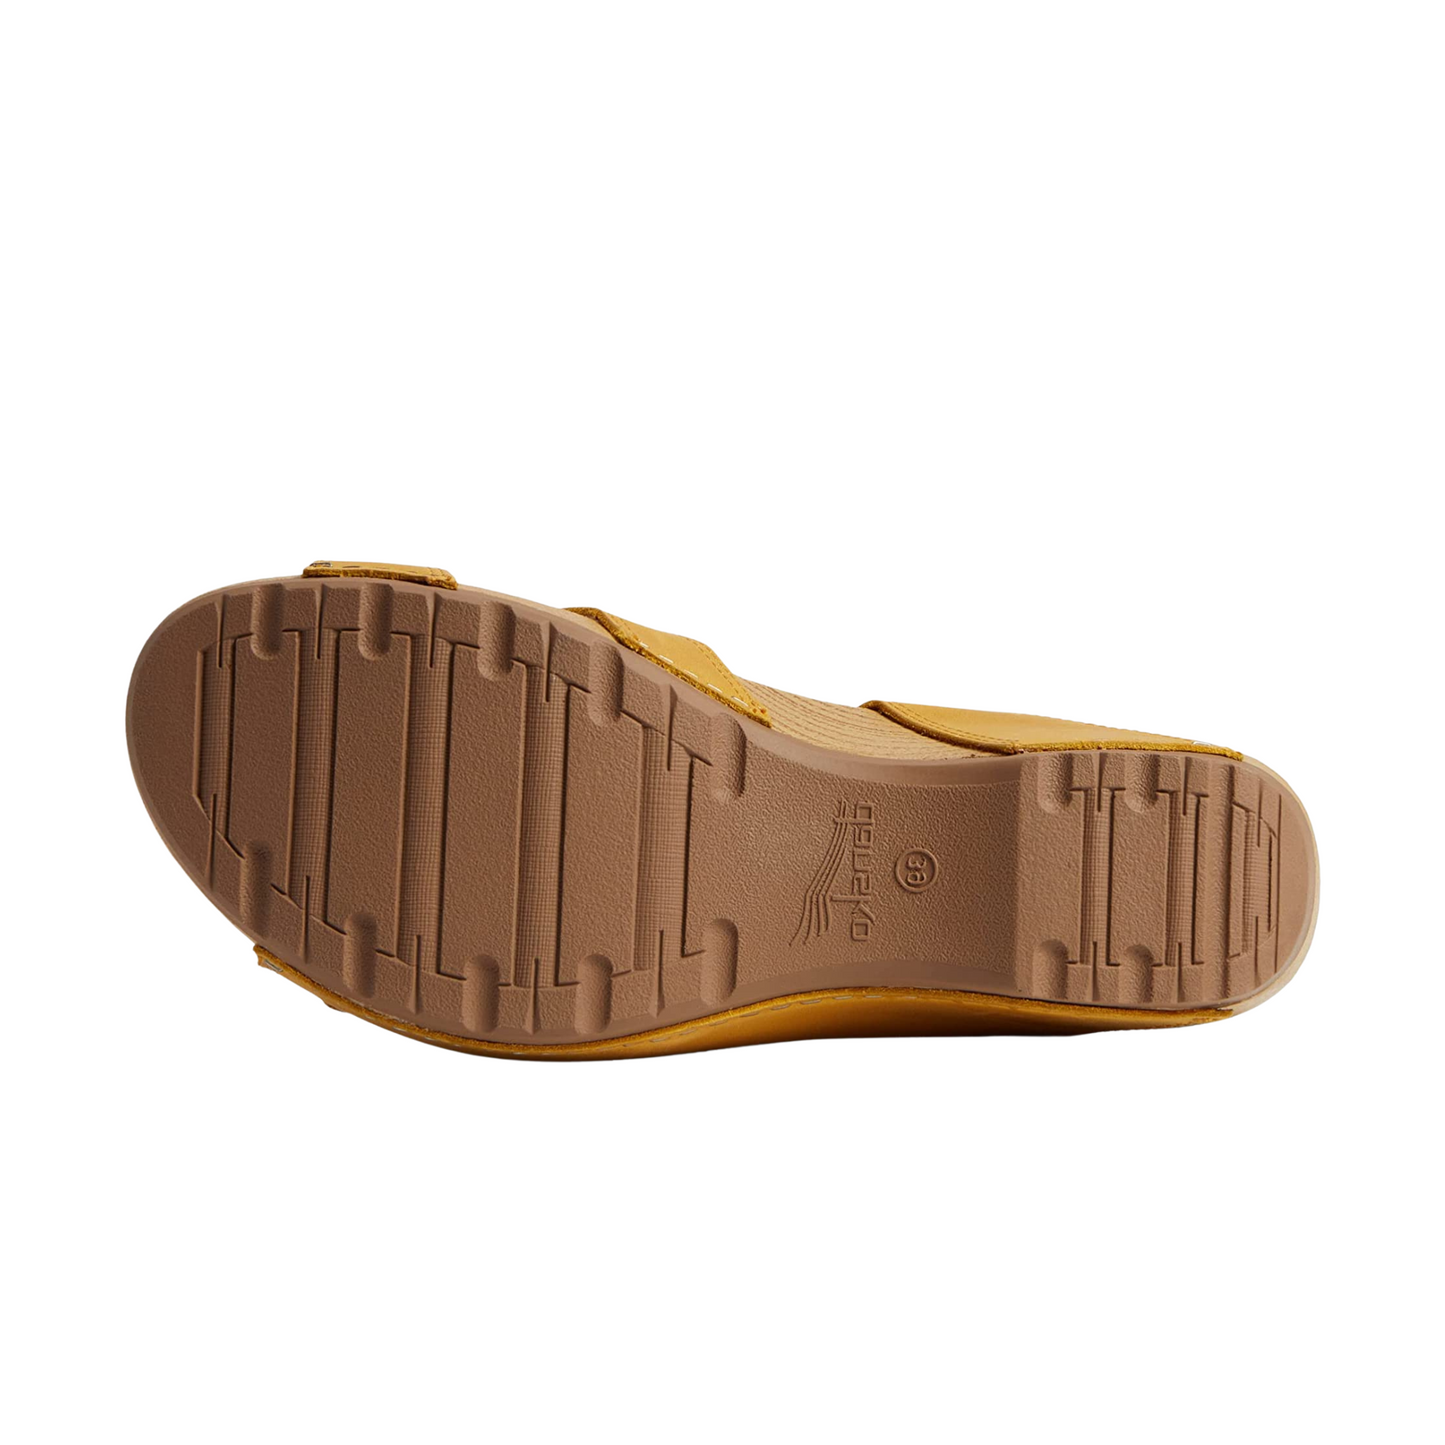 A bottom view of a sandal with yellow leather straps and a brown rubber outsole.